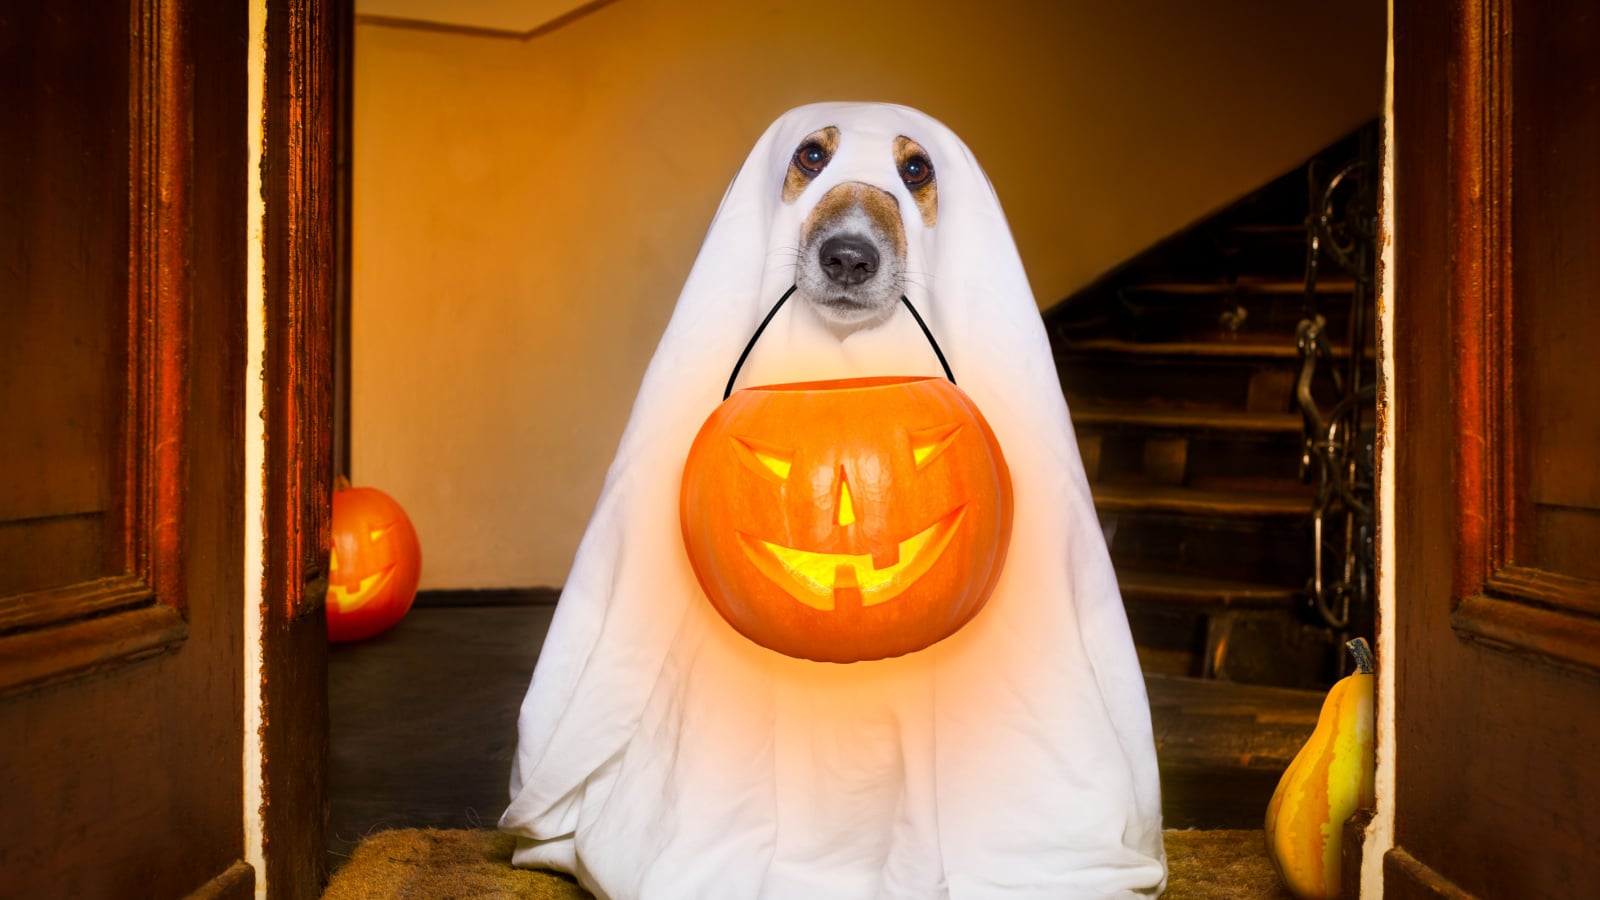 dog sit as a ghost for halloween in front of the door at home entrance with pumpkin lantern or light , scary and spooky